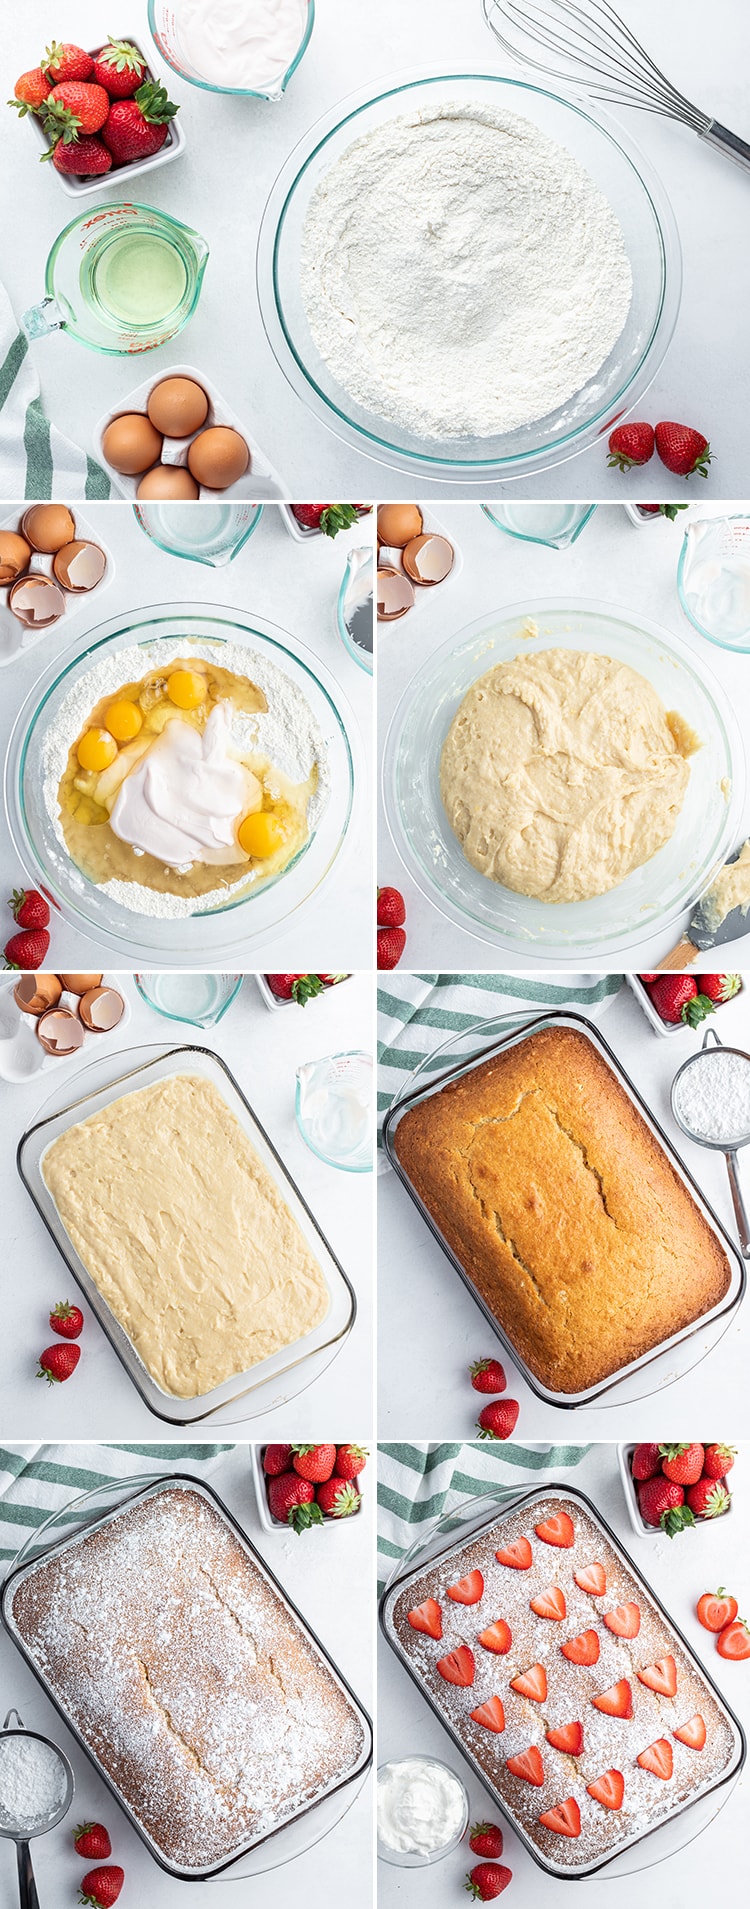 A collage of images that show the steps to create strawberry yogurt cake.